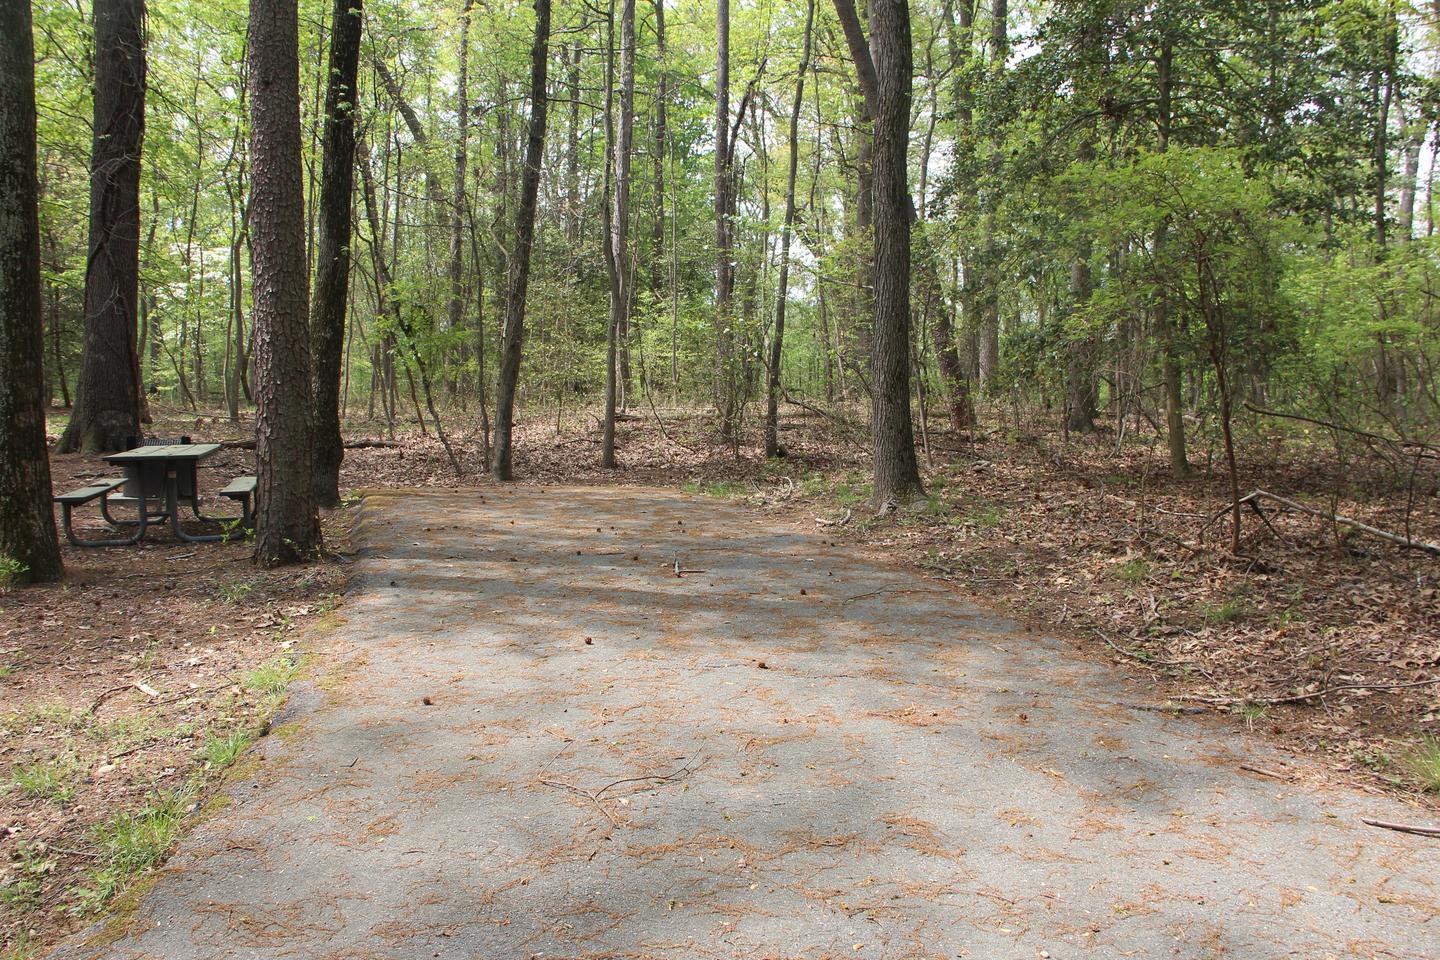 D 115  D Loop of the Greenbelt Park Md campgroundD 115  D Loop of the Greenbelt Park Maryland campground